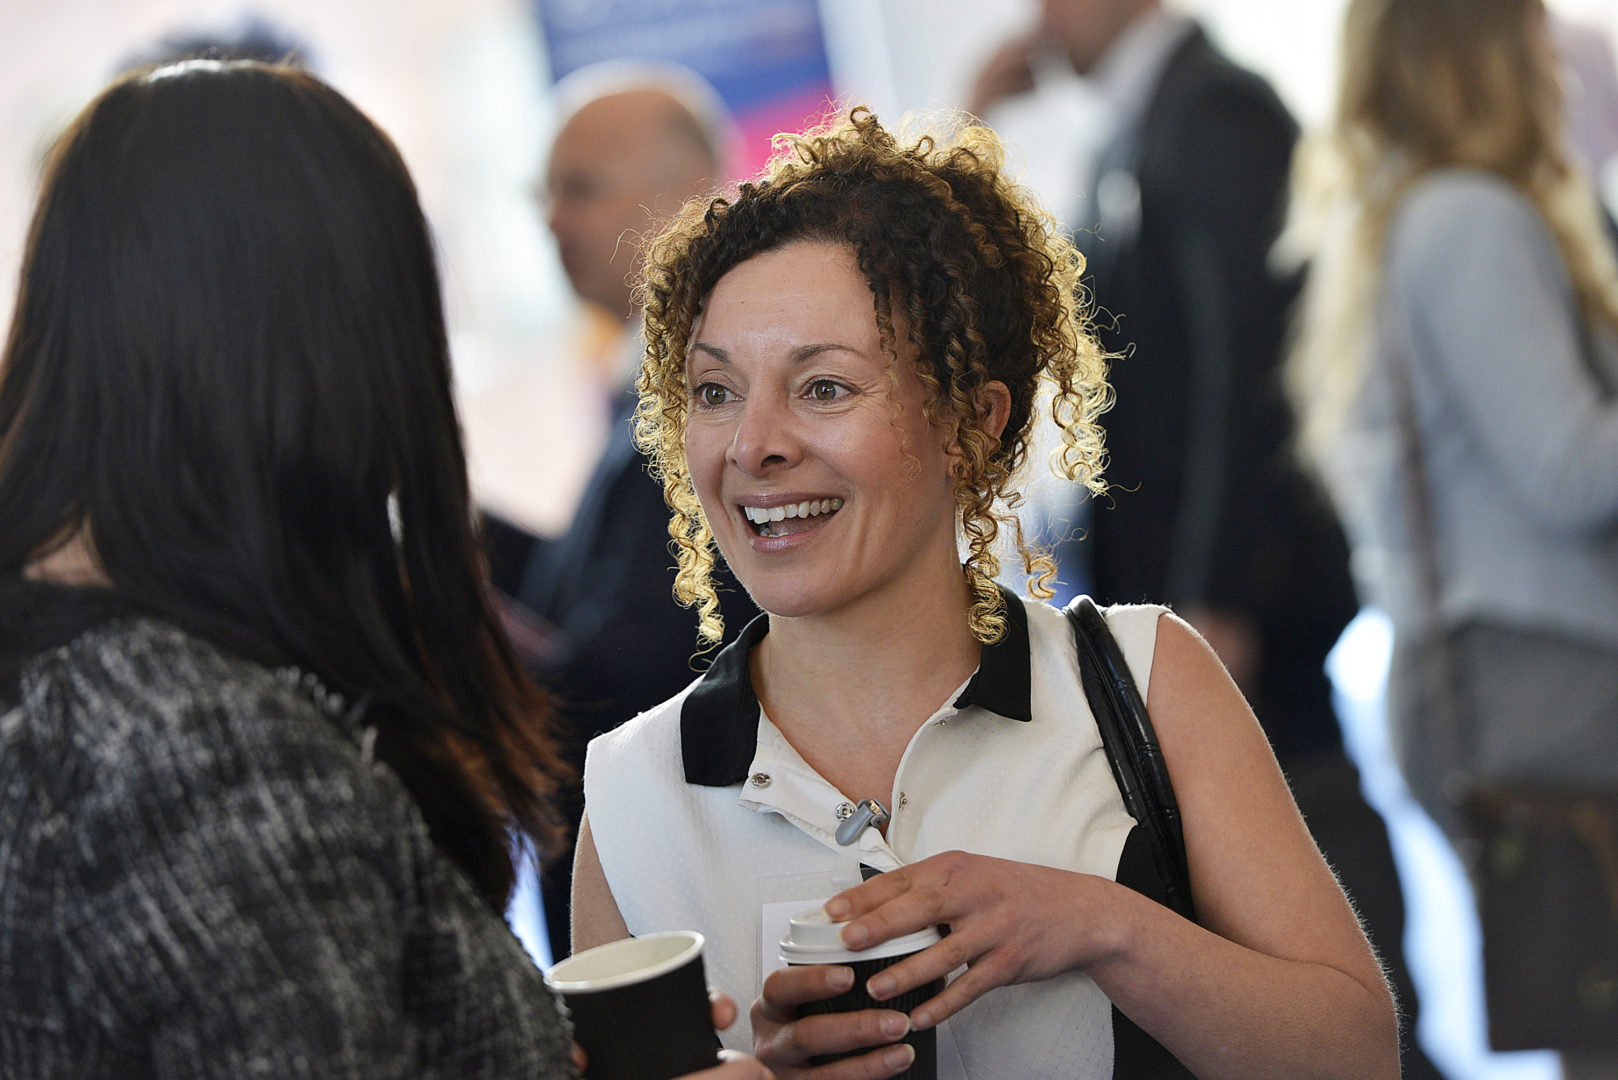 Image of Melanie Ellyard, Senior Manager for Yorkshire, Humber and Tees Valley, UK Network for the British Business Bank stood conversing with a person over a coffee